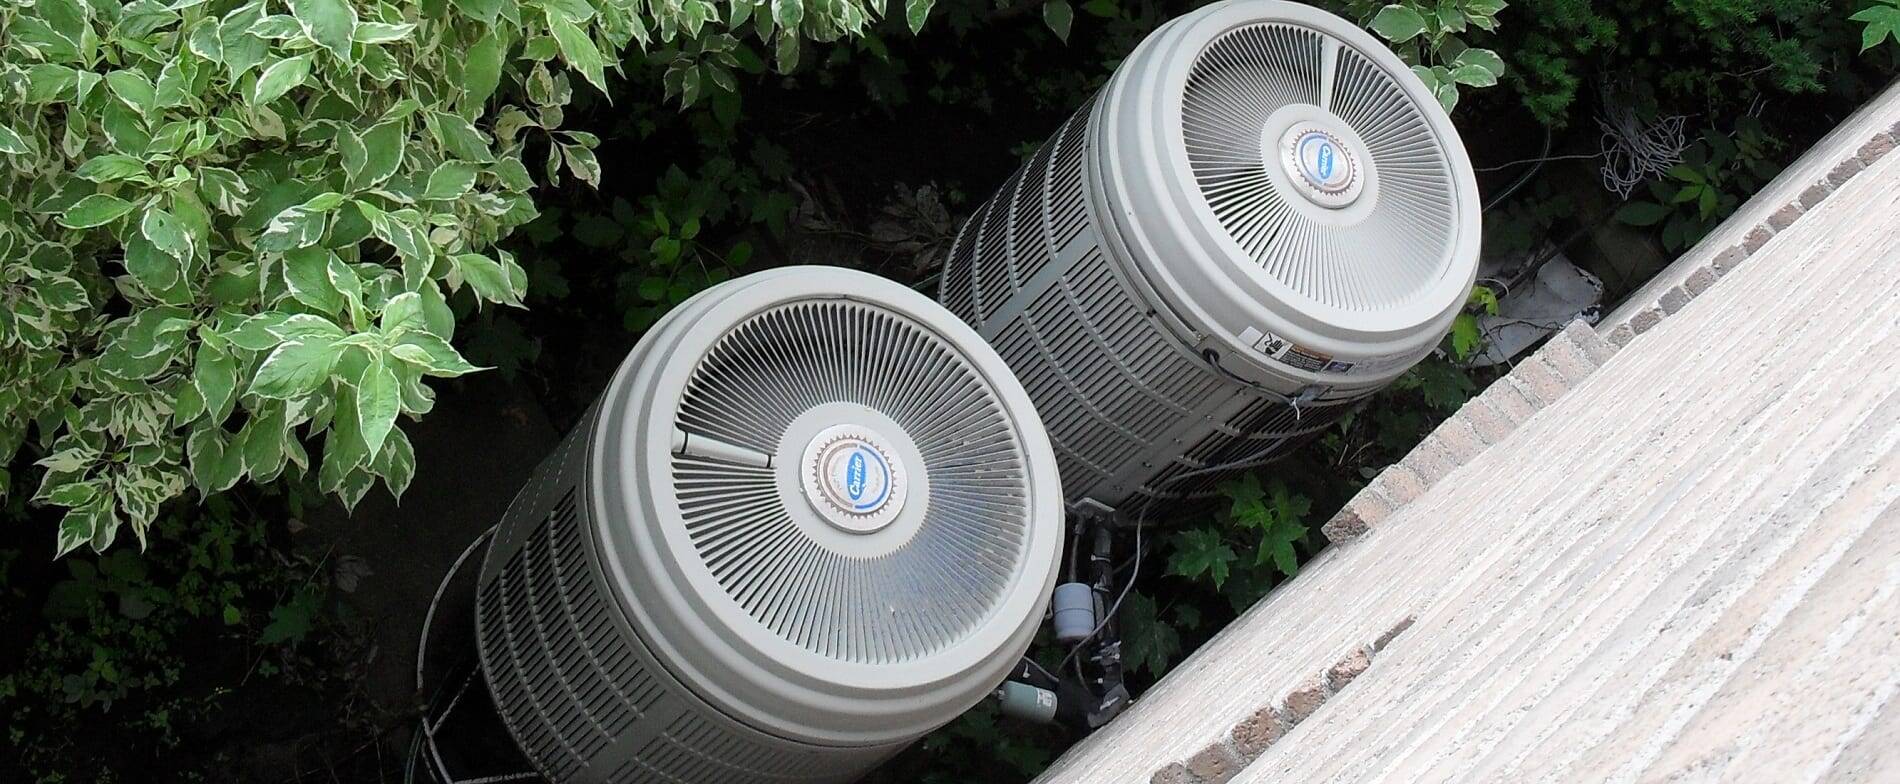 Heat pump campaign body lined up by government